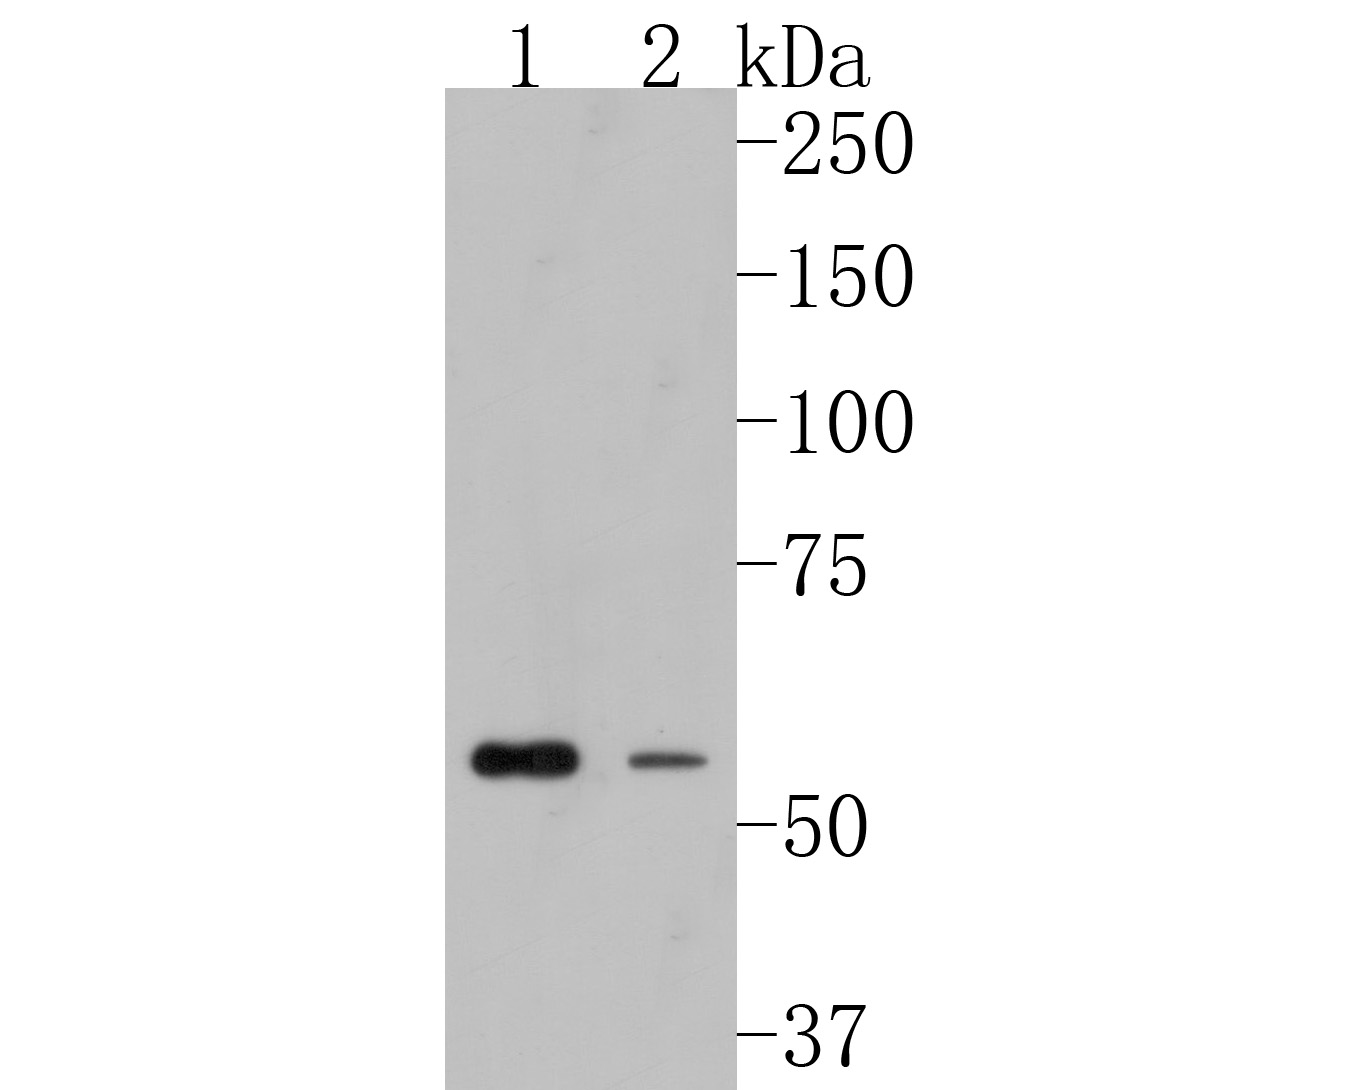 Western blot analysis of FAM13C1 on different lysates. Proteins were transferred to a PVDF membrane and blocked with 5% BSA in PBS for 1 hour at room temperature. The primary antibody (HA500122, 1/1,000) was used in 5% BSA at room temperature for 2 hours. Goat Anti-Rabbit IgG - HRP Secondary Antibody (HA1001) at 1:200,000 dilution was used for 1 hour at room temperature.<br />
Positive control: <br />
Lane 1: HepG2 cell lysate<br />
Lane 2: Rat brain tissue lysate